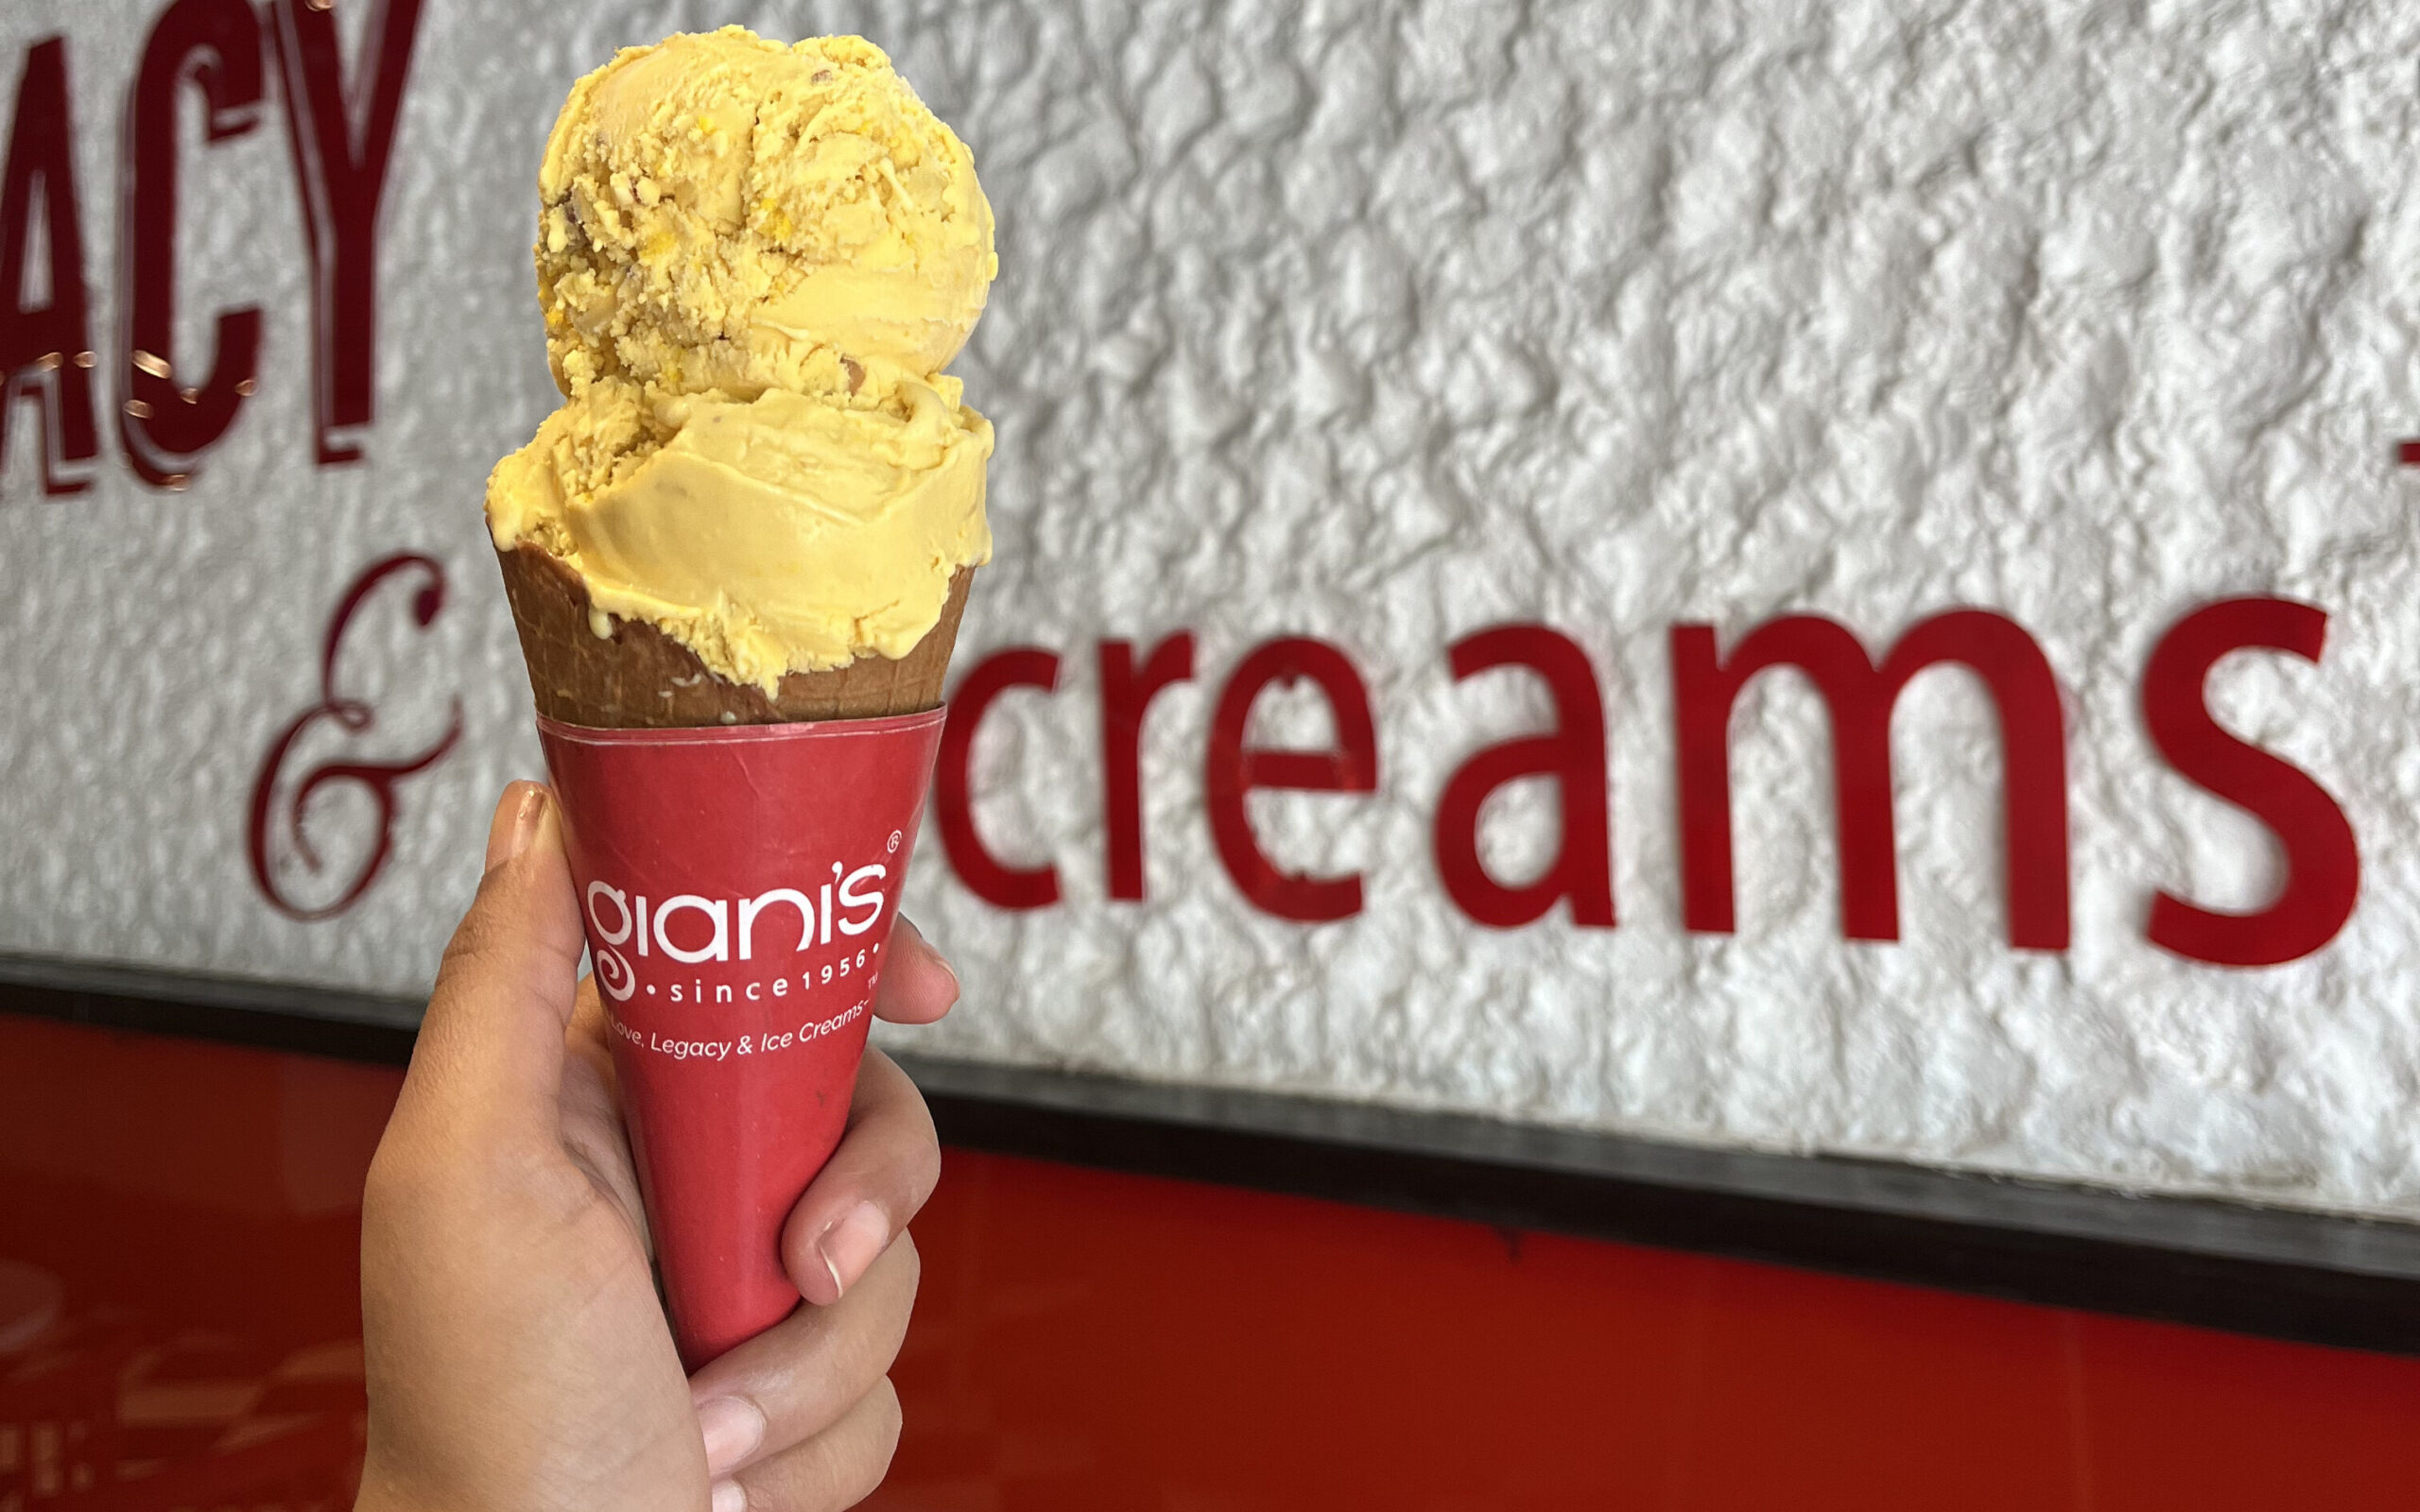 Rajbhog ice cream by Giani’s comes in upscale packaging and is made with real milk, premium almonds, and flavors.